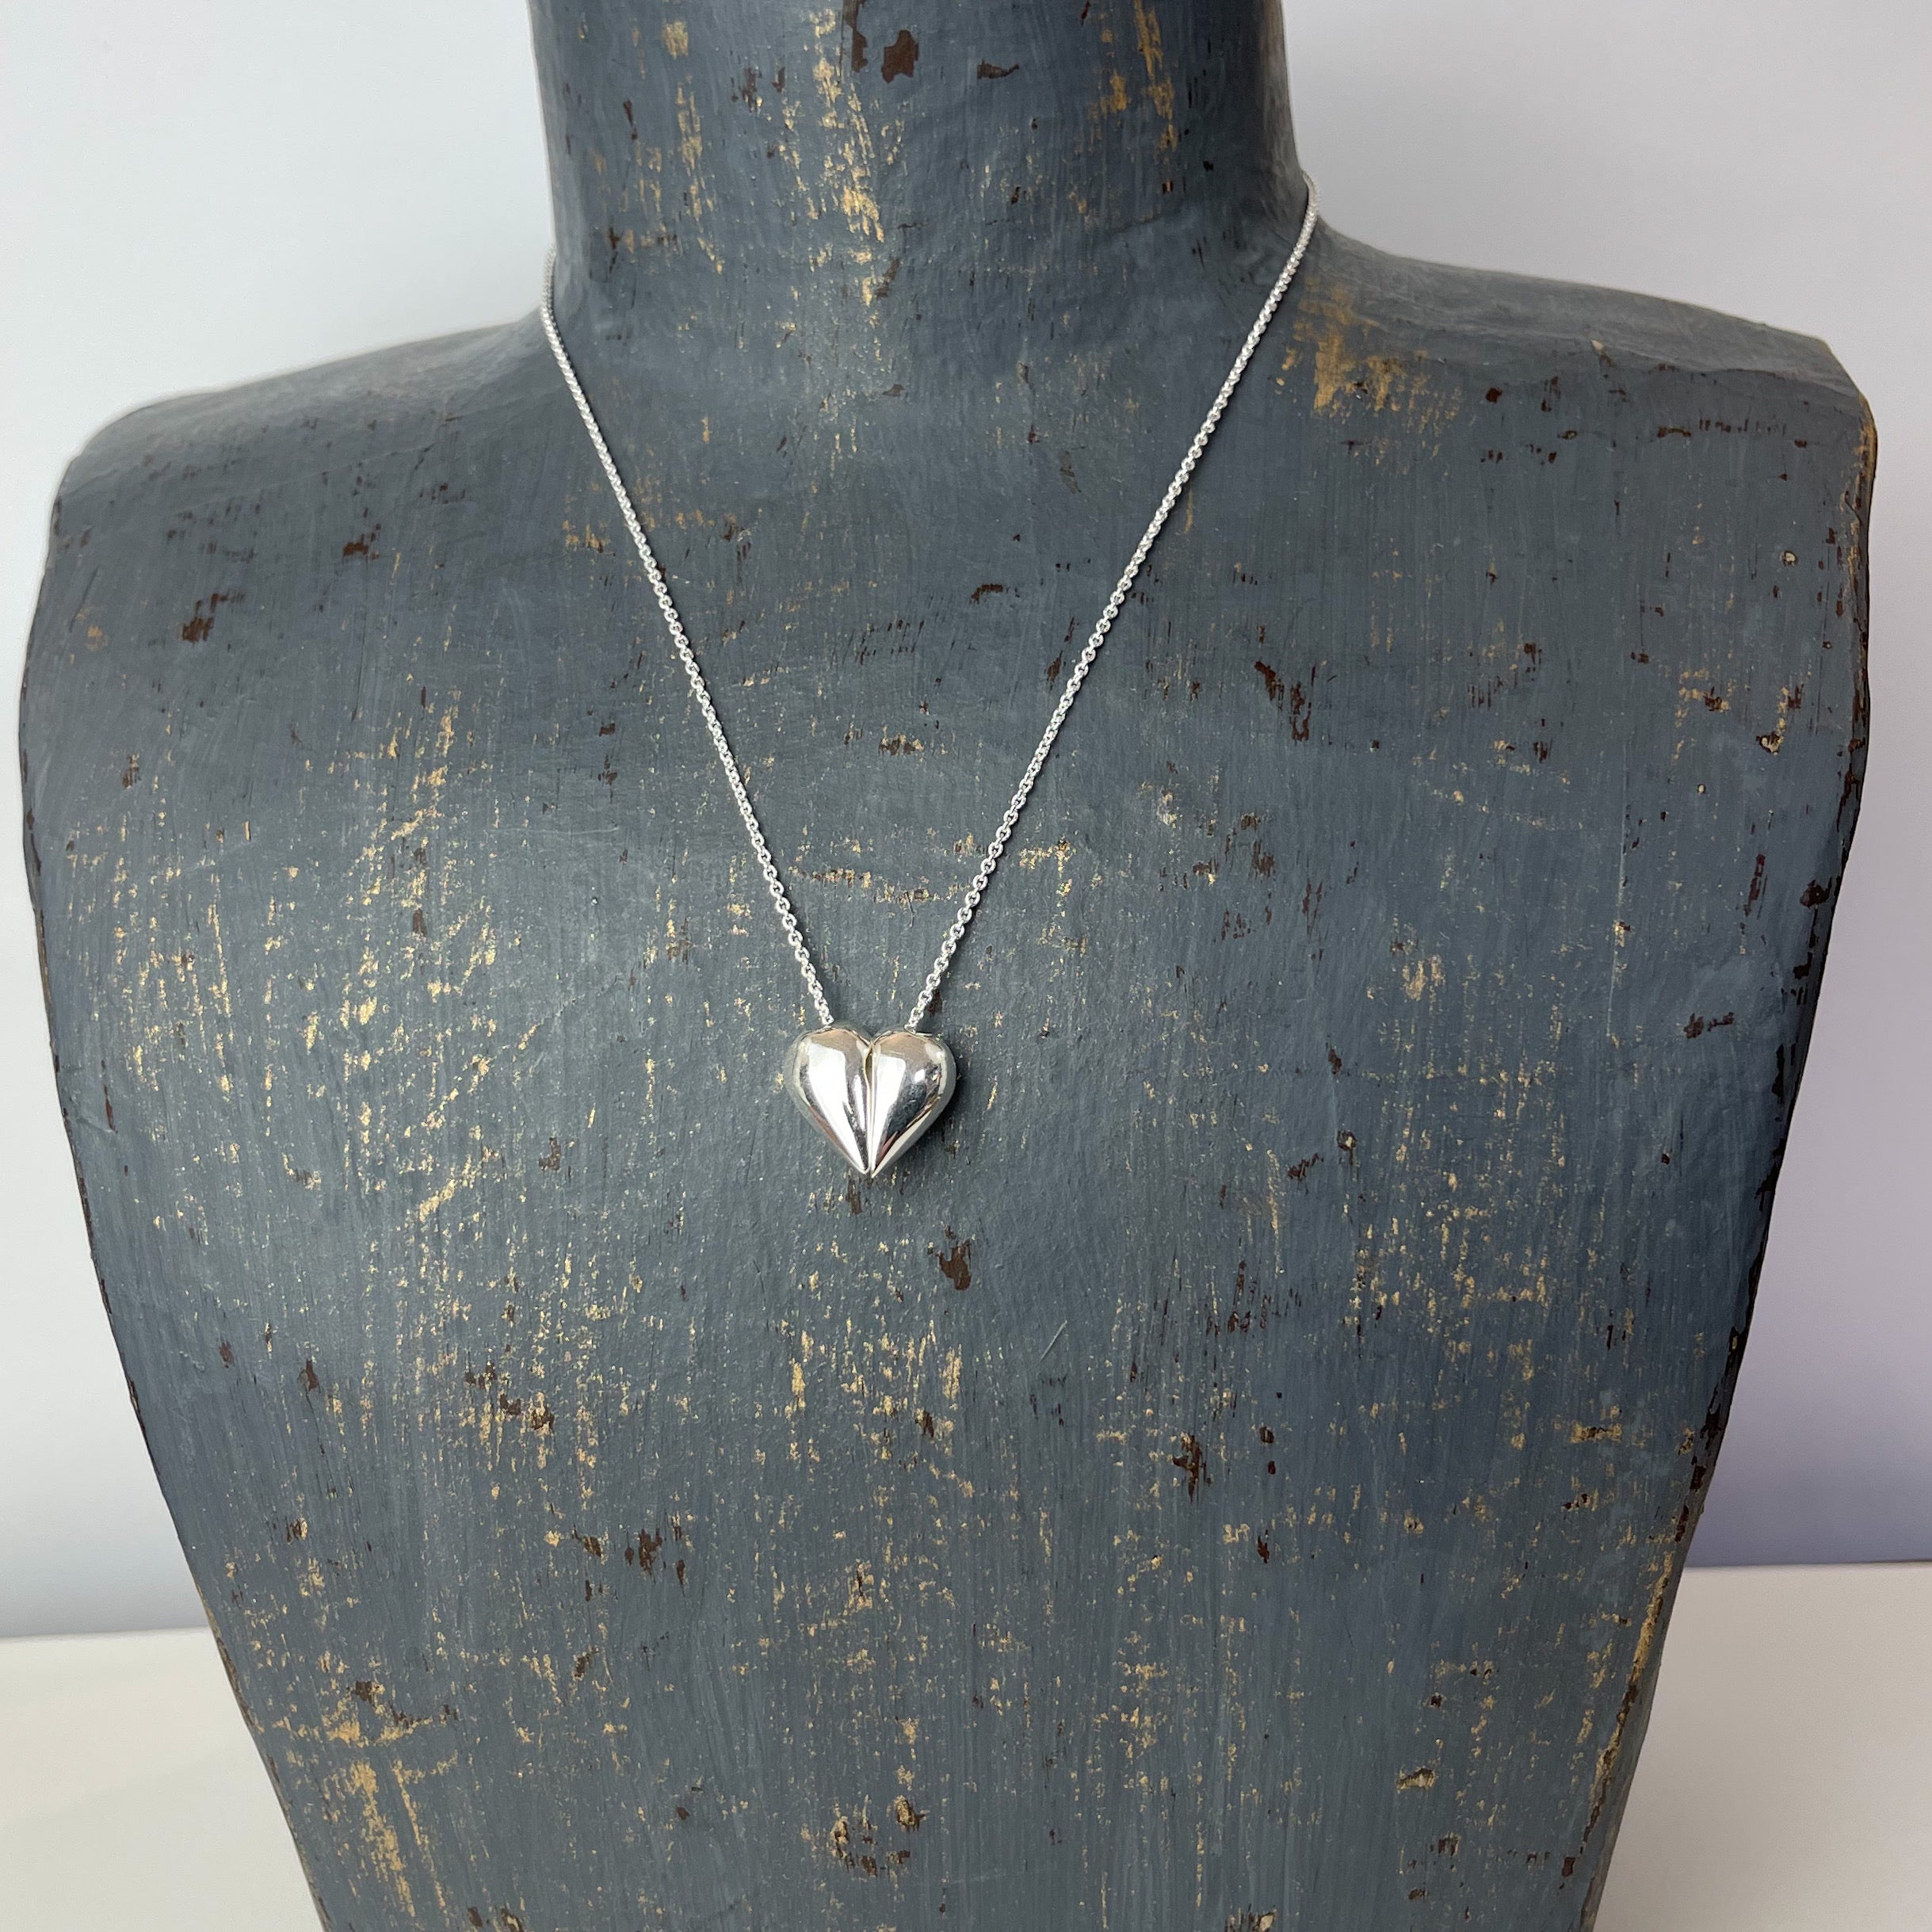 Seed Heart Necklace - The Nancy Smillie Shop - Art, Jewellery & Designer Gifts Glasgow